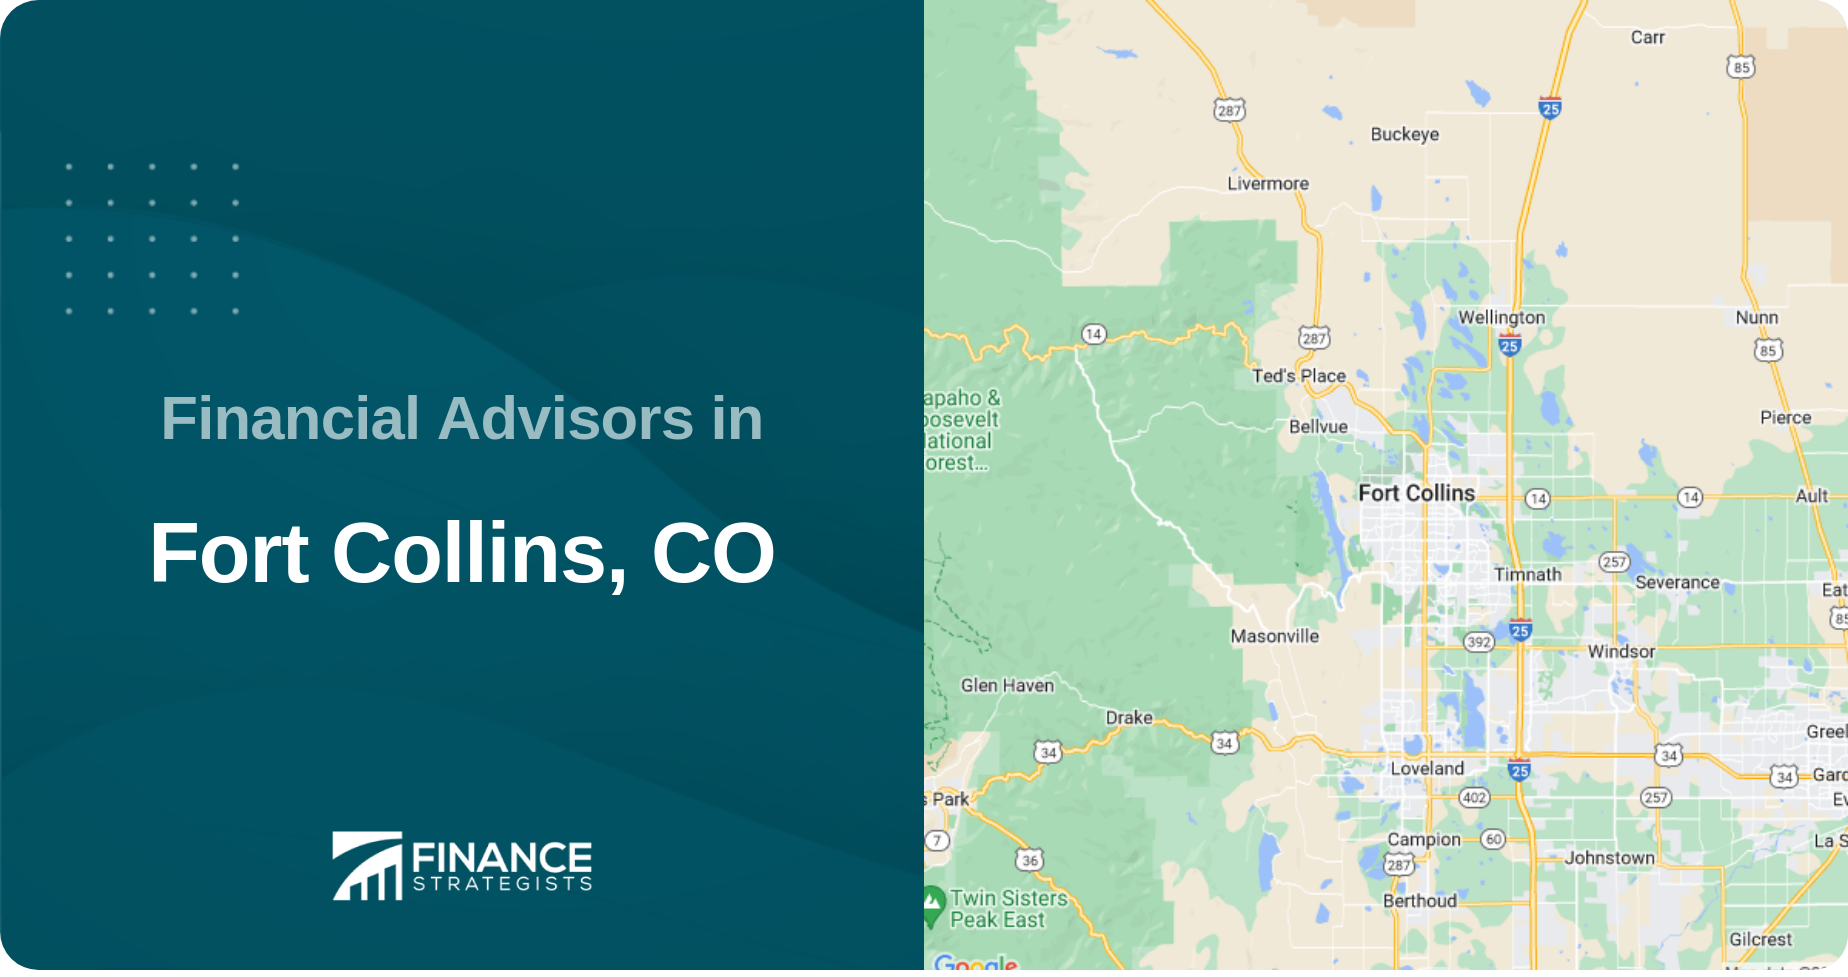 Financial Advisors in Fort Collins, CO